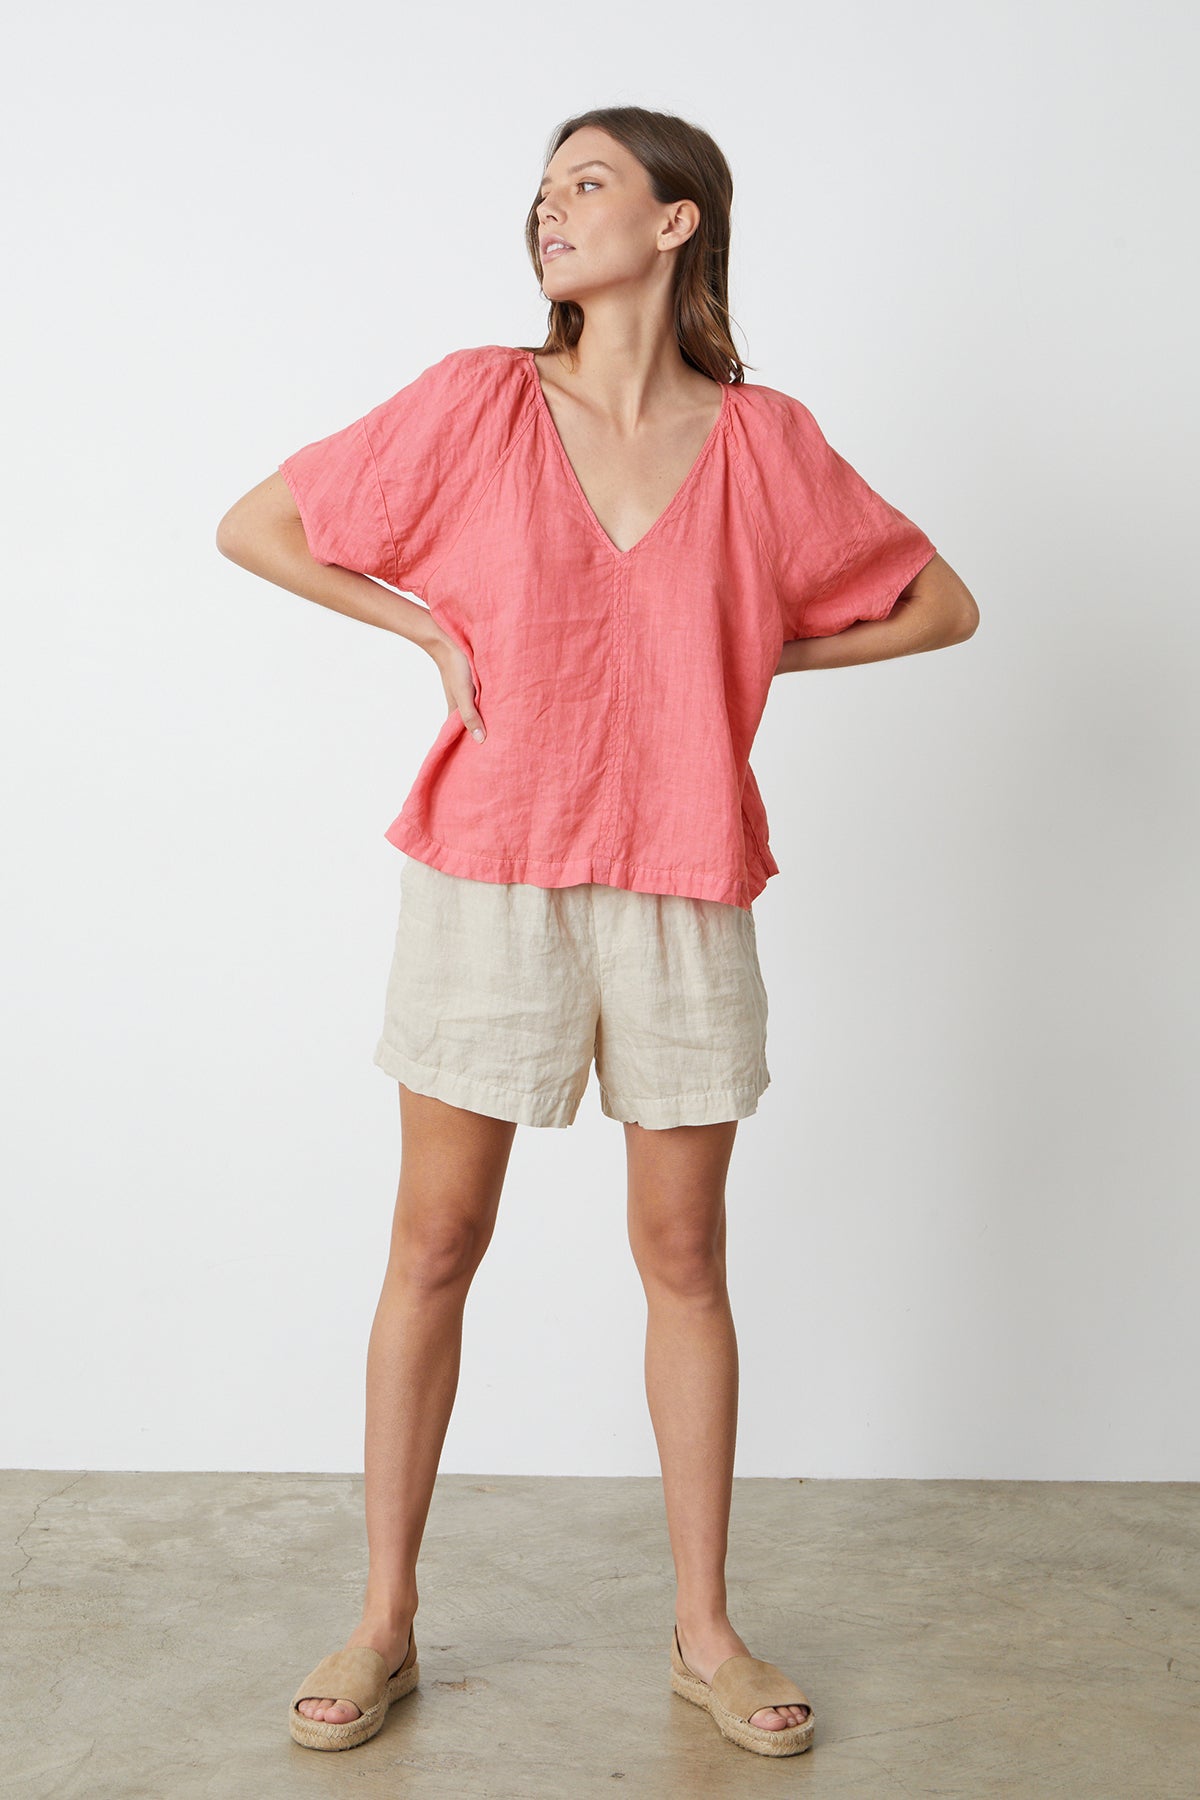   A woman standing in front of a white wall wearing the CALLIN PUFF SLEEVE LINEN TOP in rosebay by Velvet by Graham & Spencer with Tammy shorts and sandals, full length front 